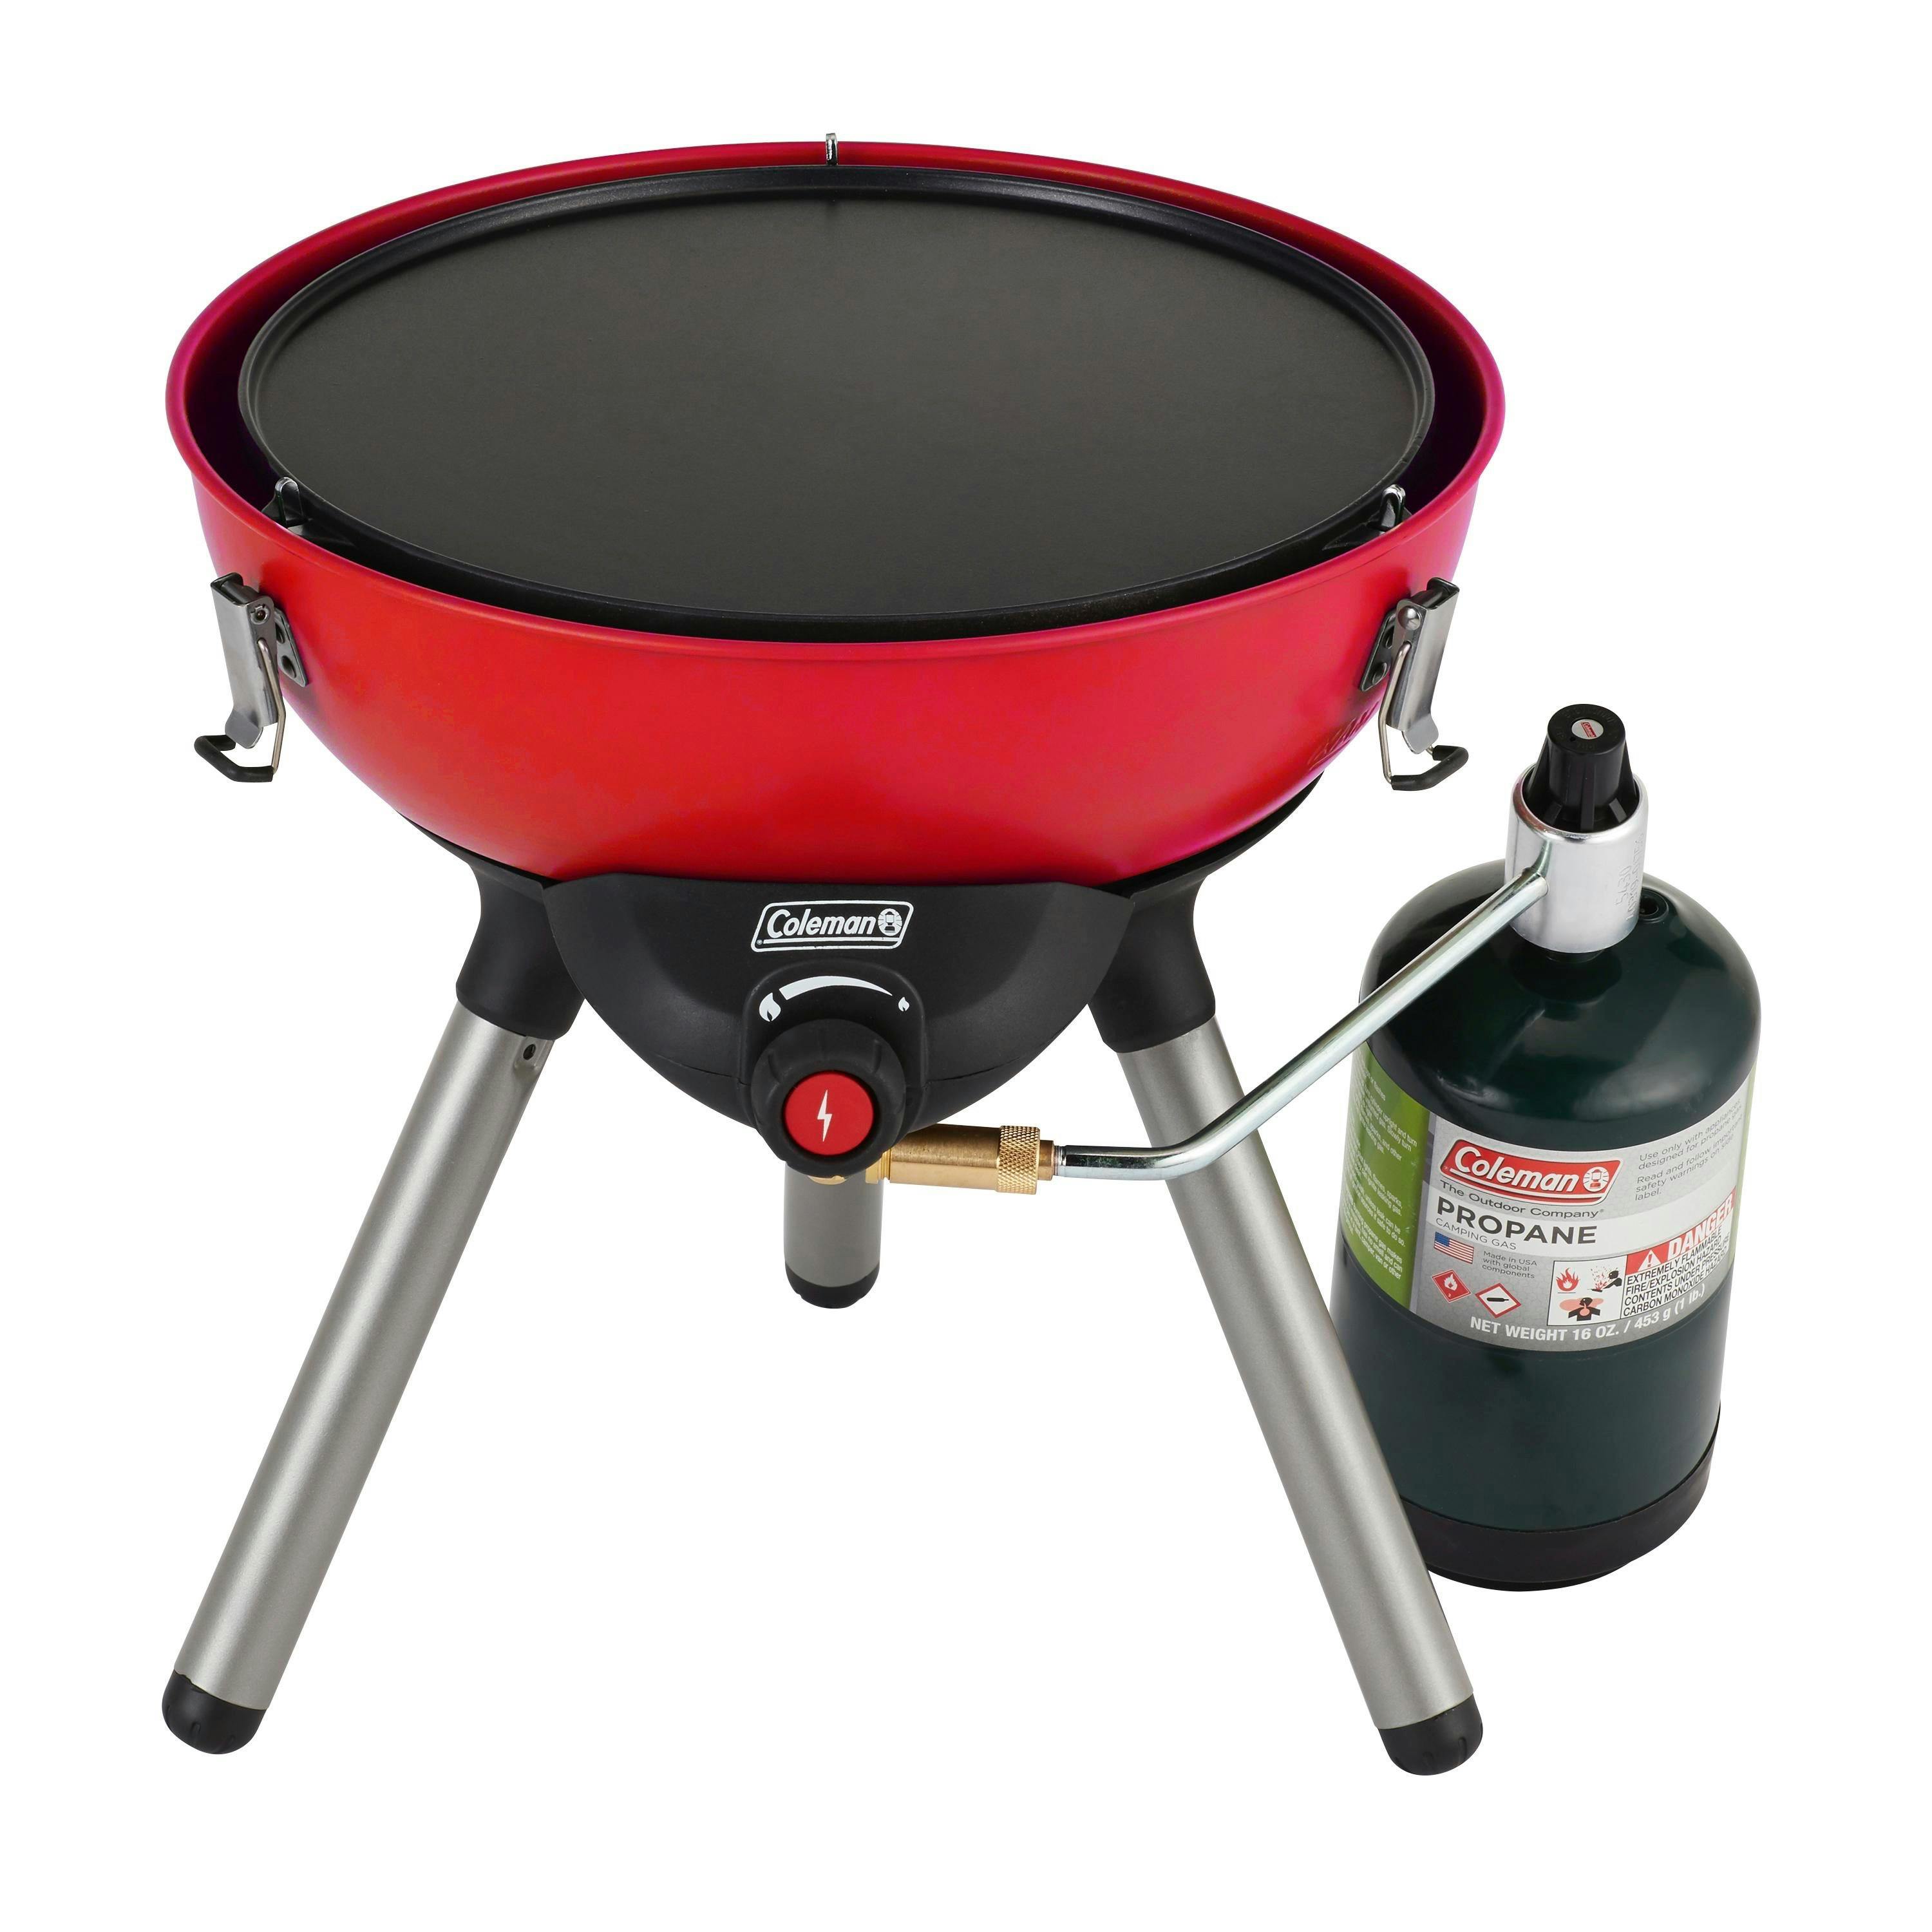 Coleman 4-In-1 Portable Propane Gas Camping Stove · Red